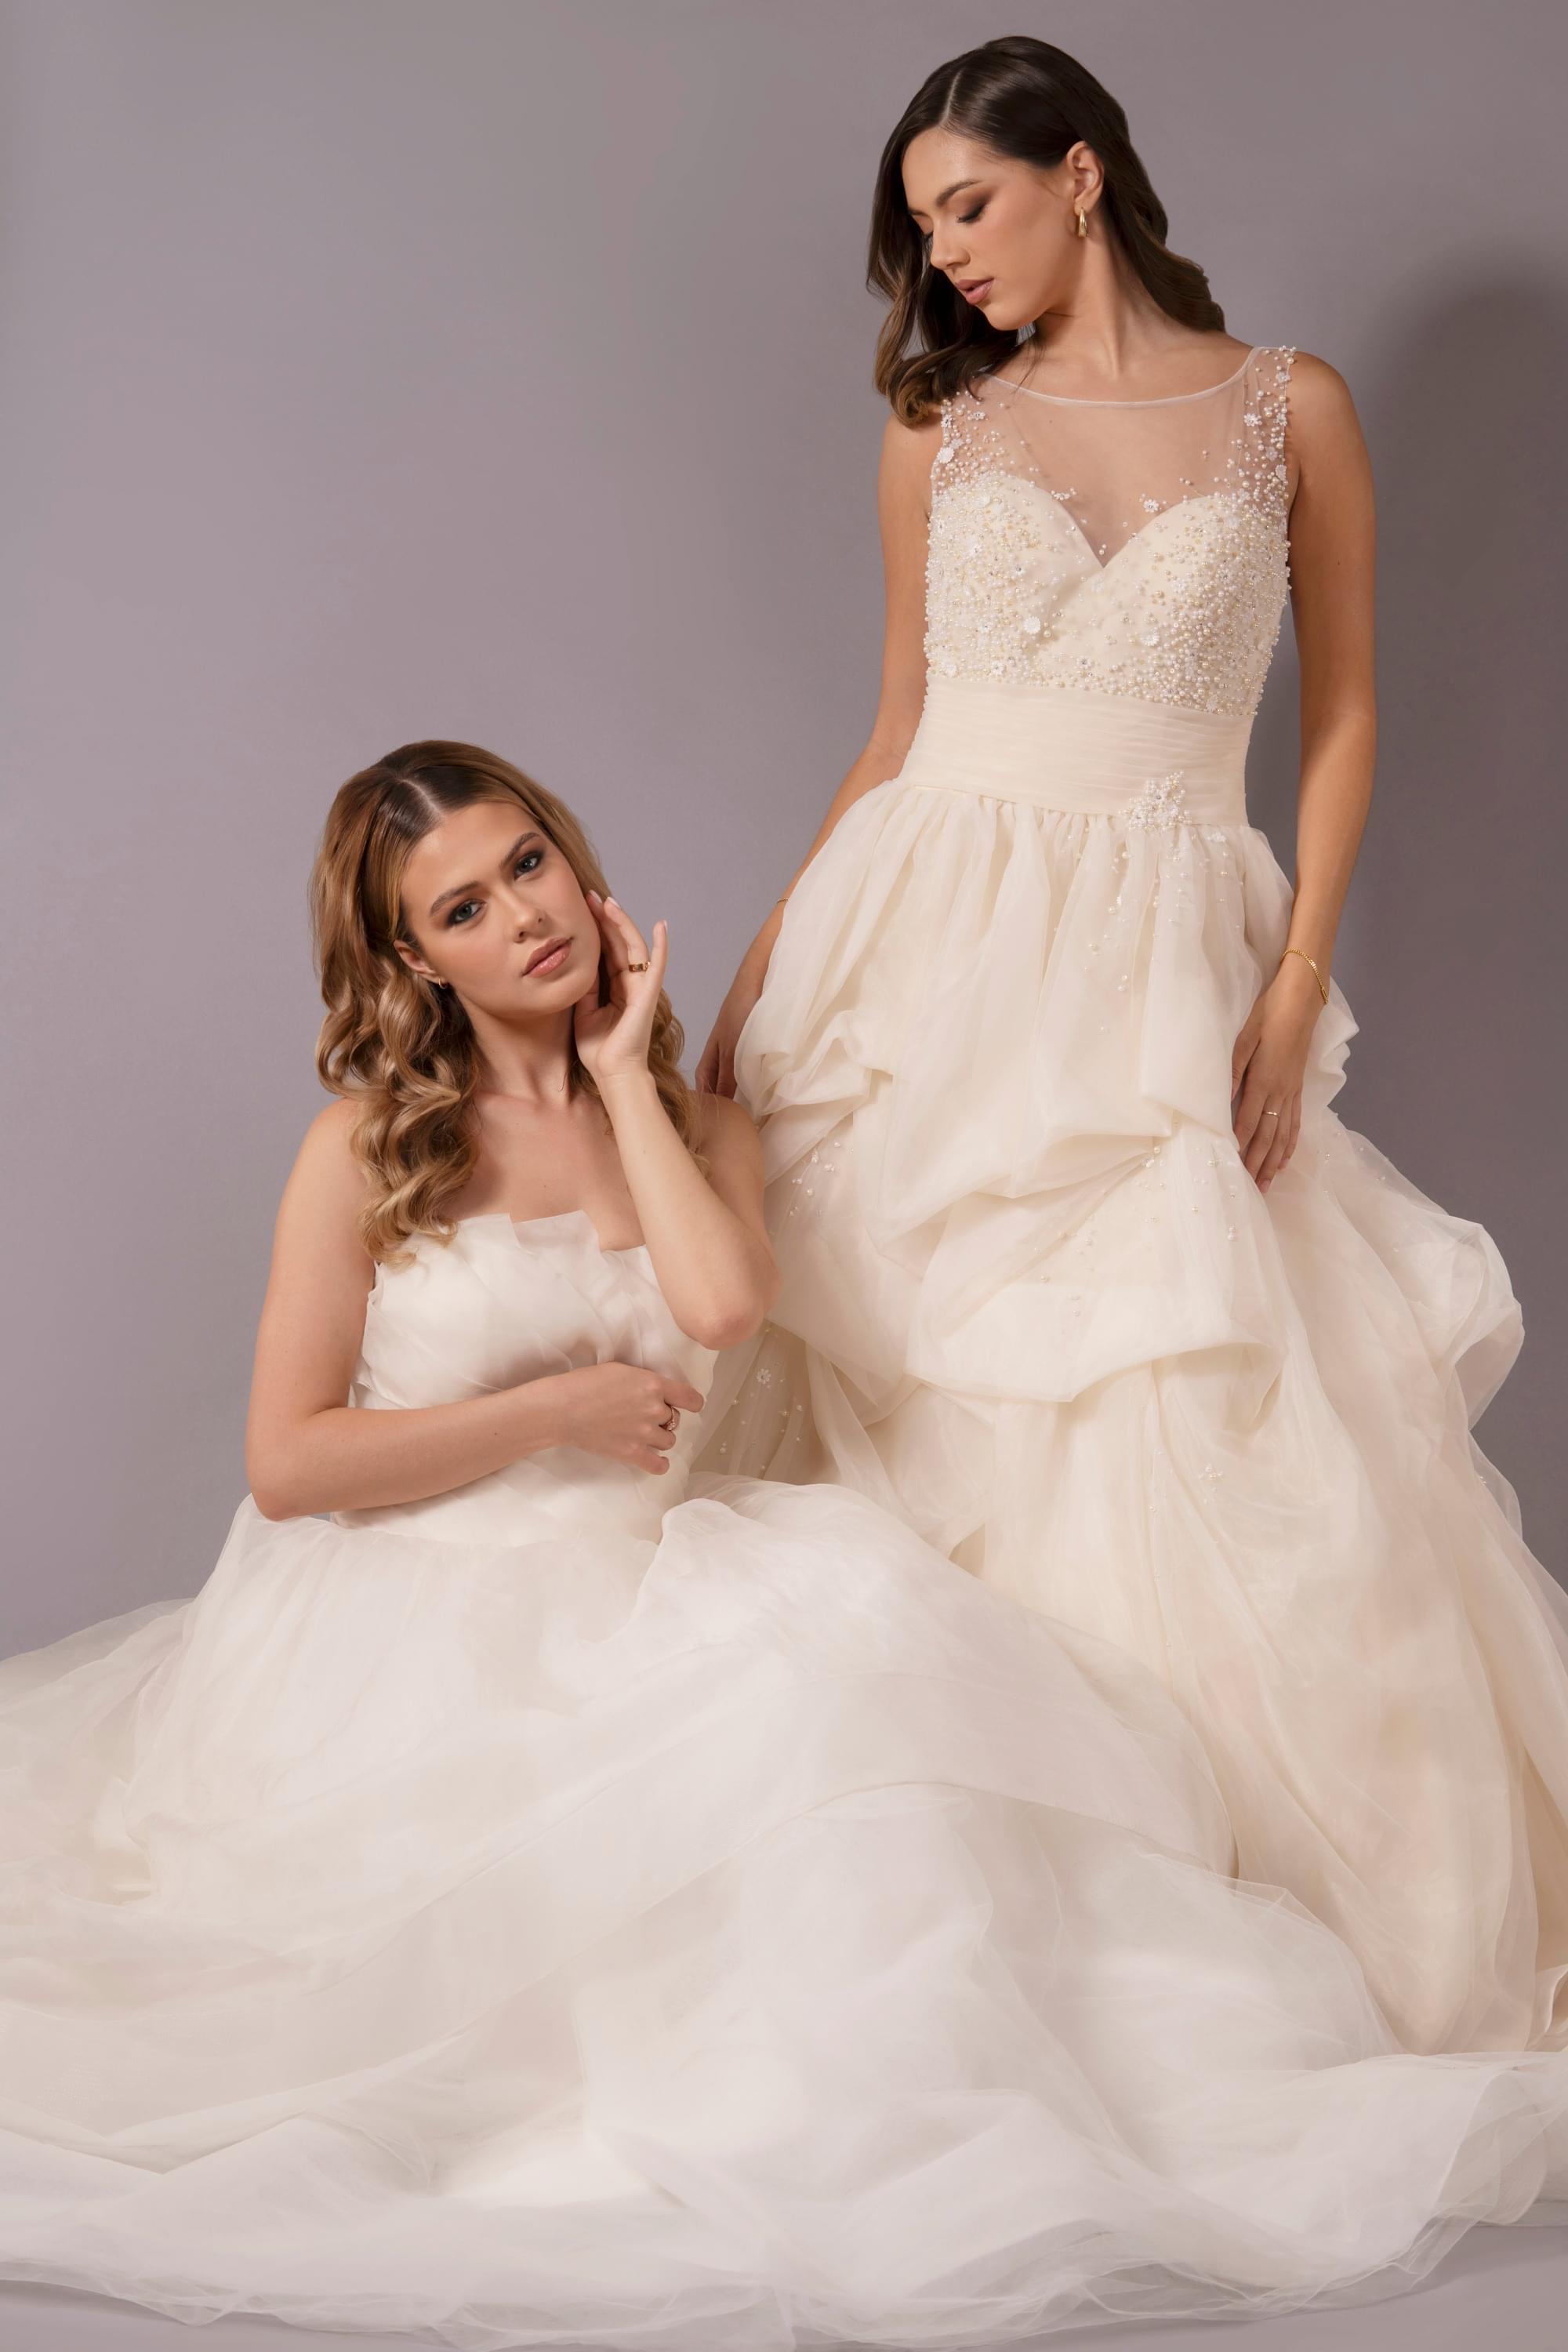 tylas bride, wedding dress collection. Now for sale, come in and try on our beautiful dresses.